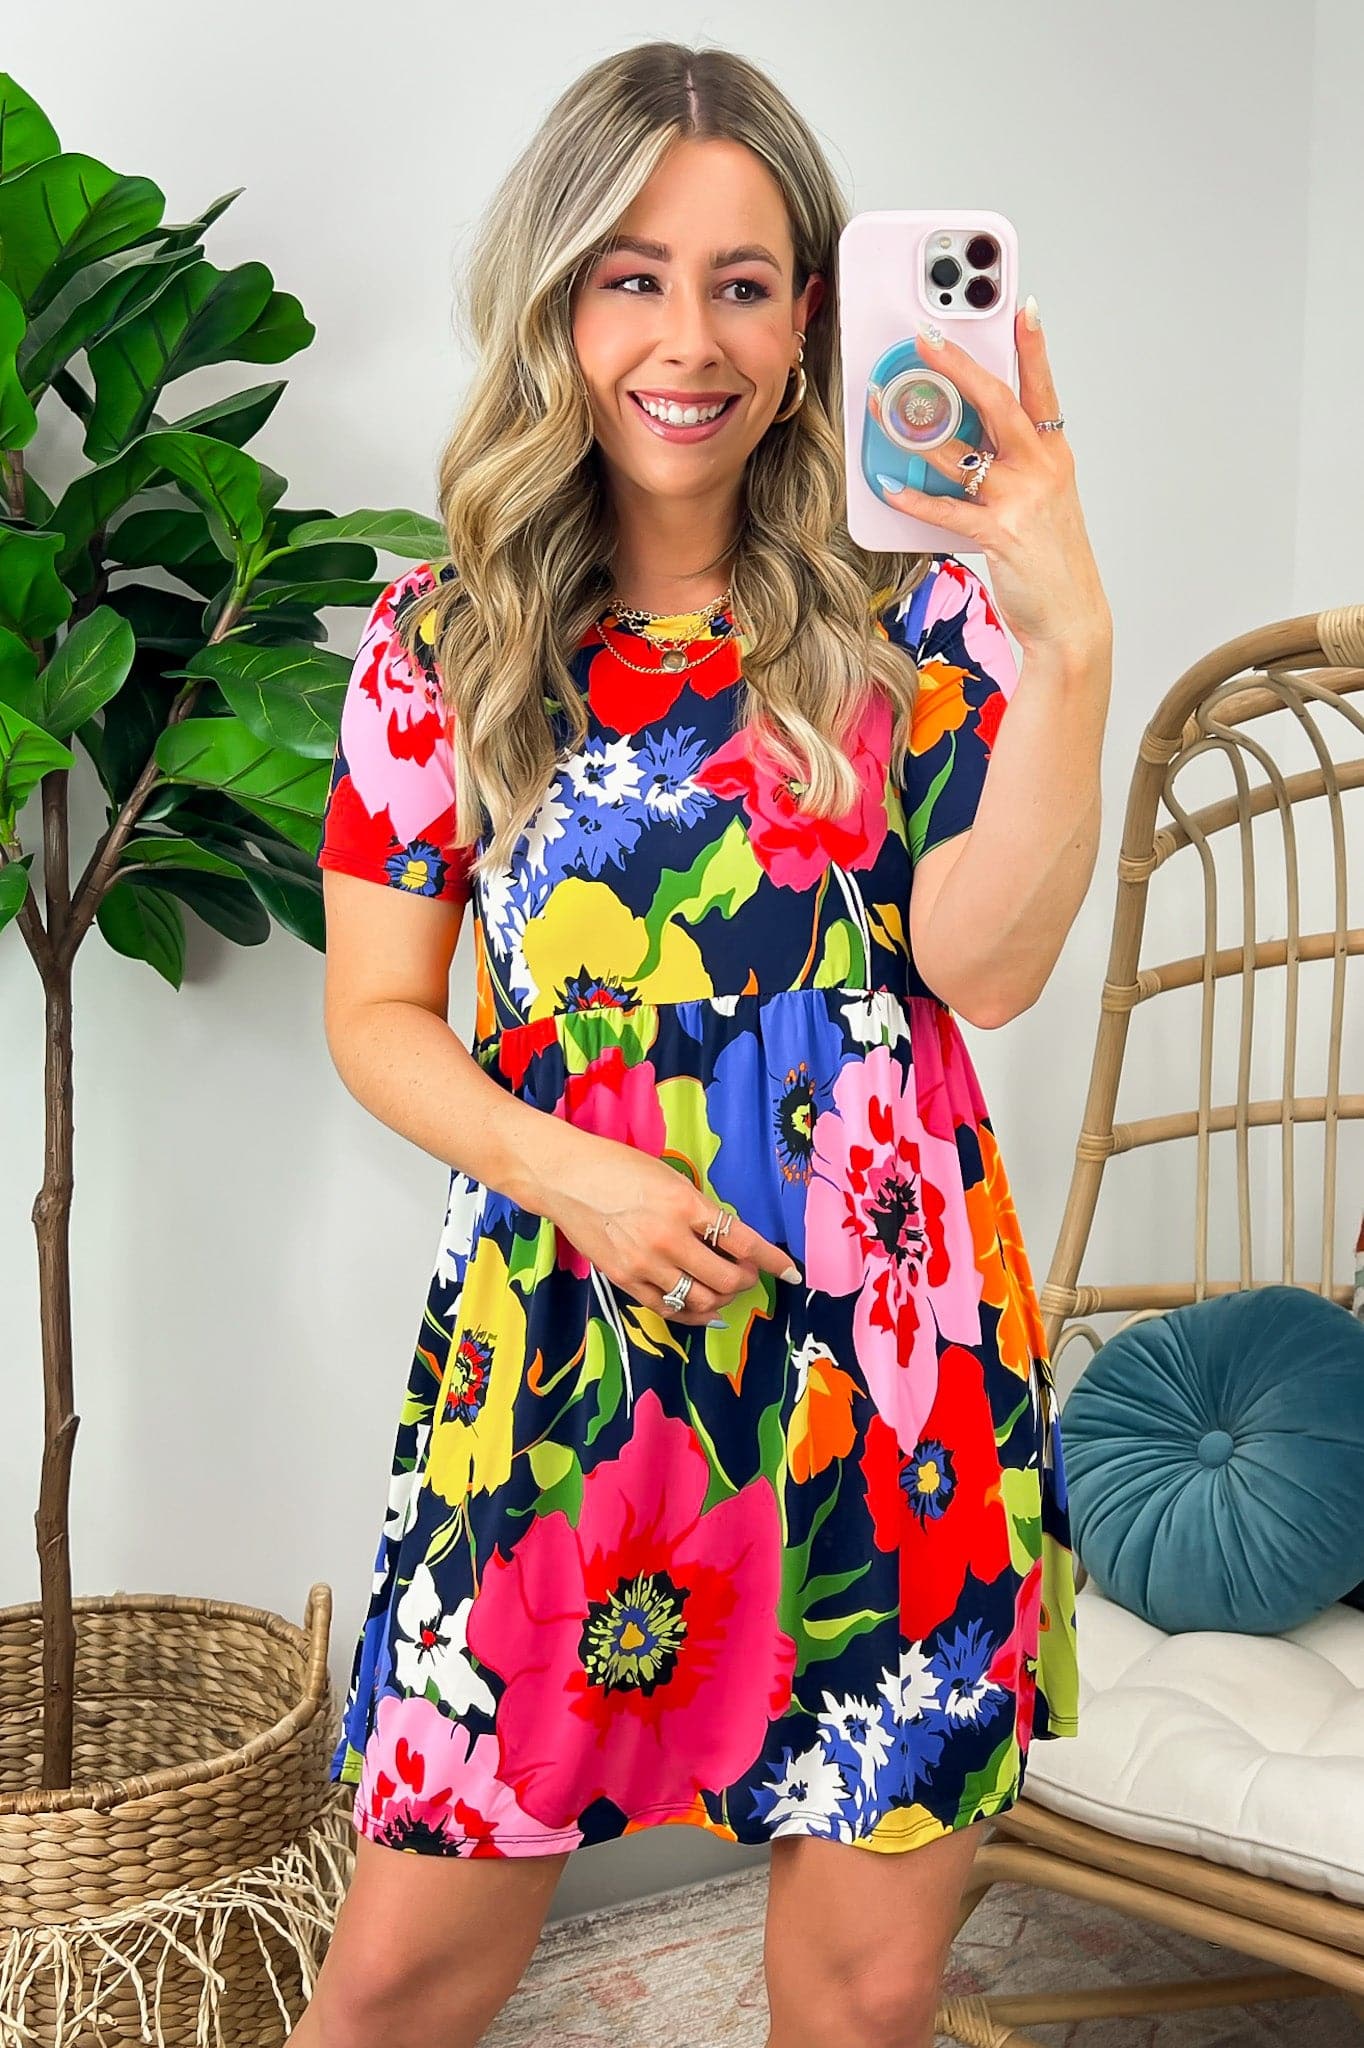  Optimistic Essence Floral Print Babydoll Dress - FINAL SALE - Madison and Mallory